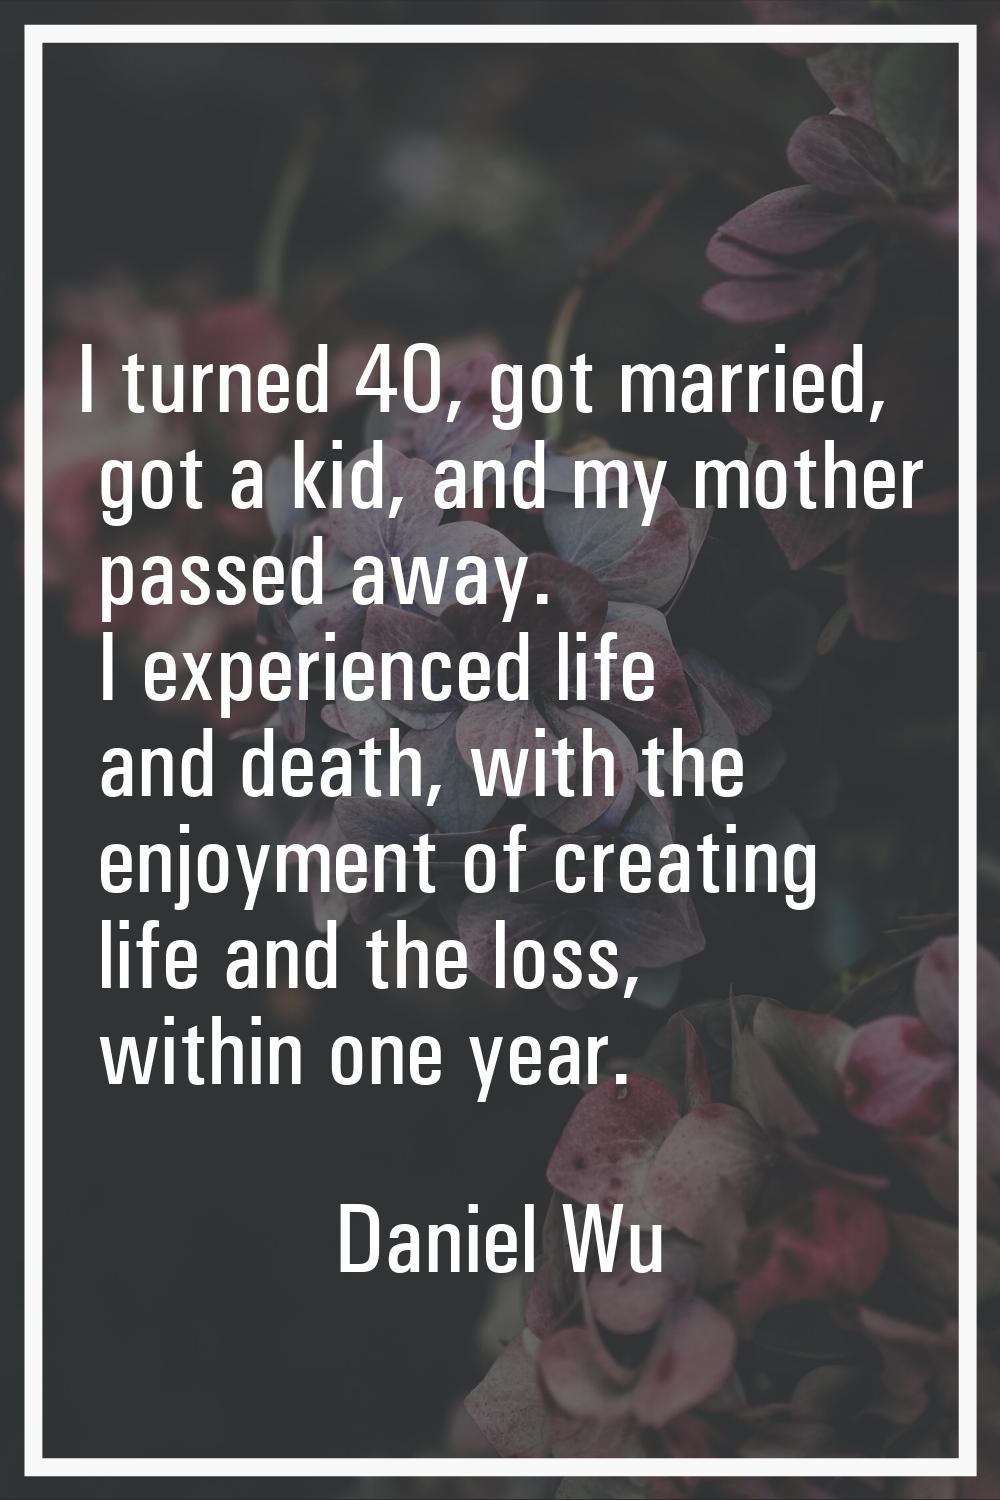 I turned 40, got married, got a kid, and my mother passed away. I experienced life and death, with 